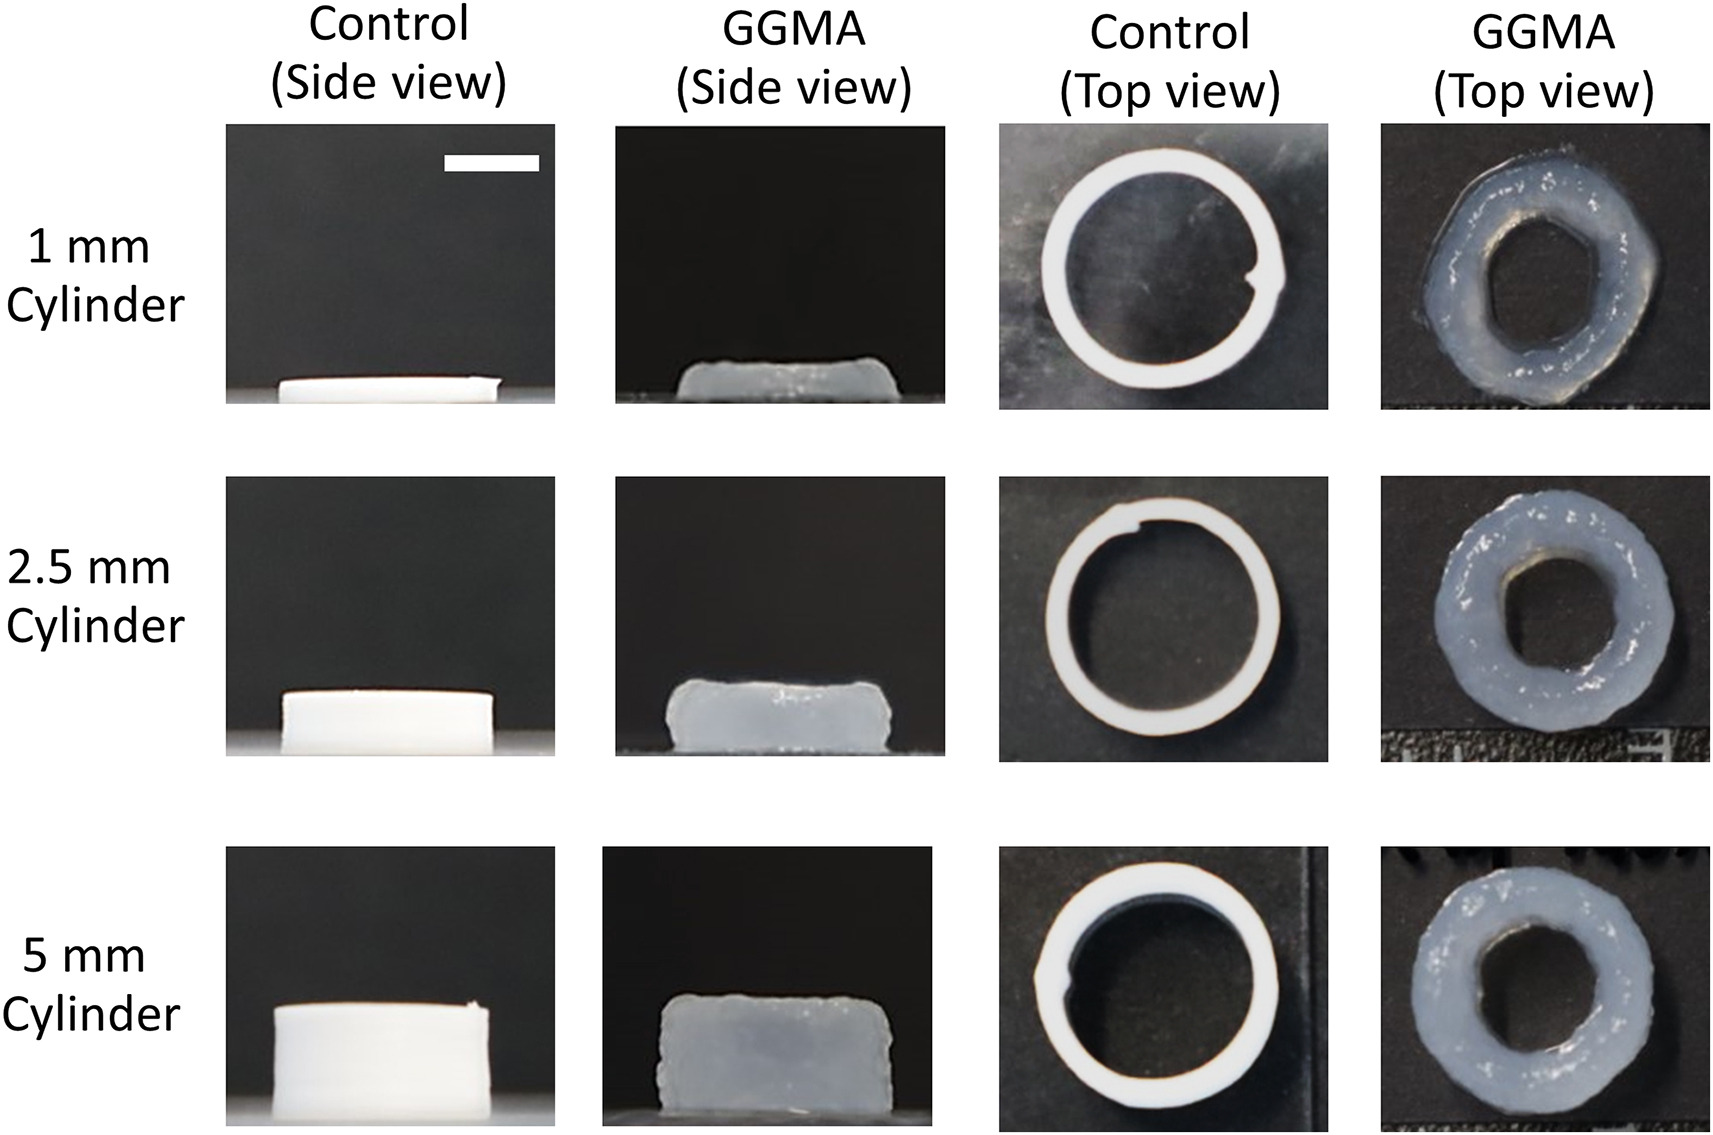 Side-views and top-views of printed cylinders for the evaluation of printing accuracy and structural integrity. Image via Biomaterials.